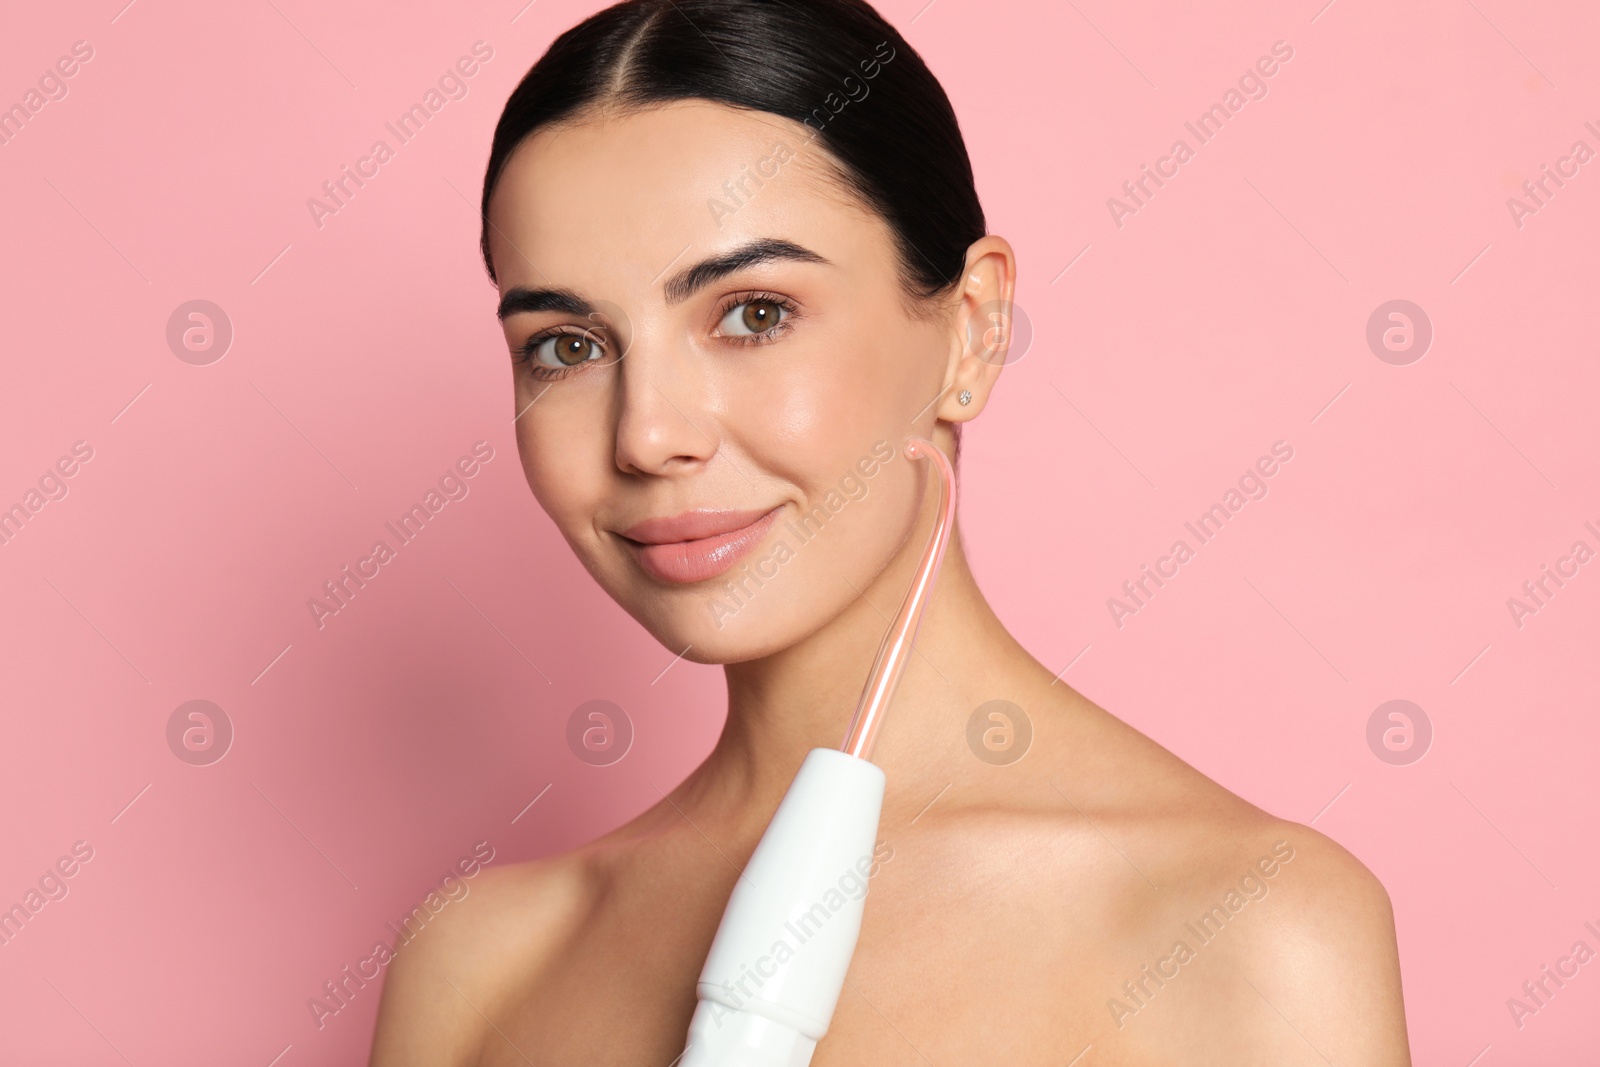 Photo of Woman using high frequency darsonval device on pink background